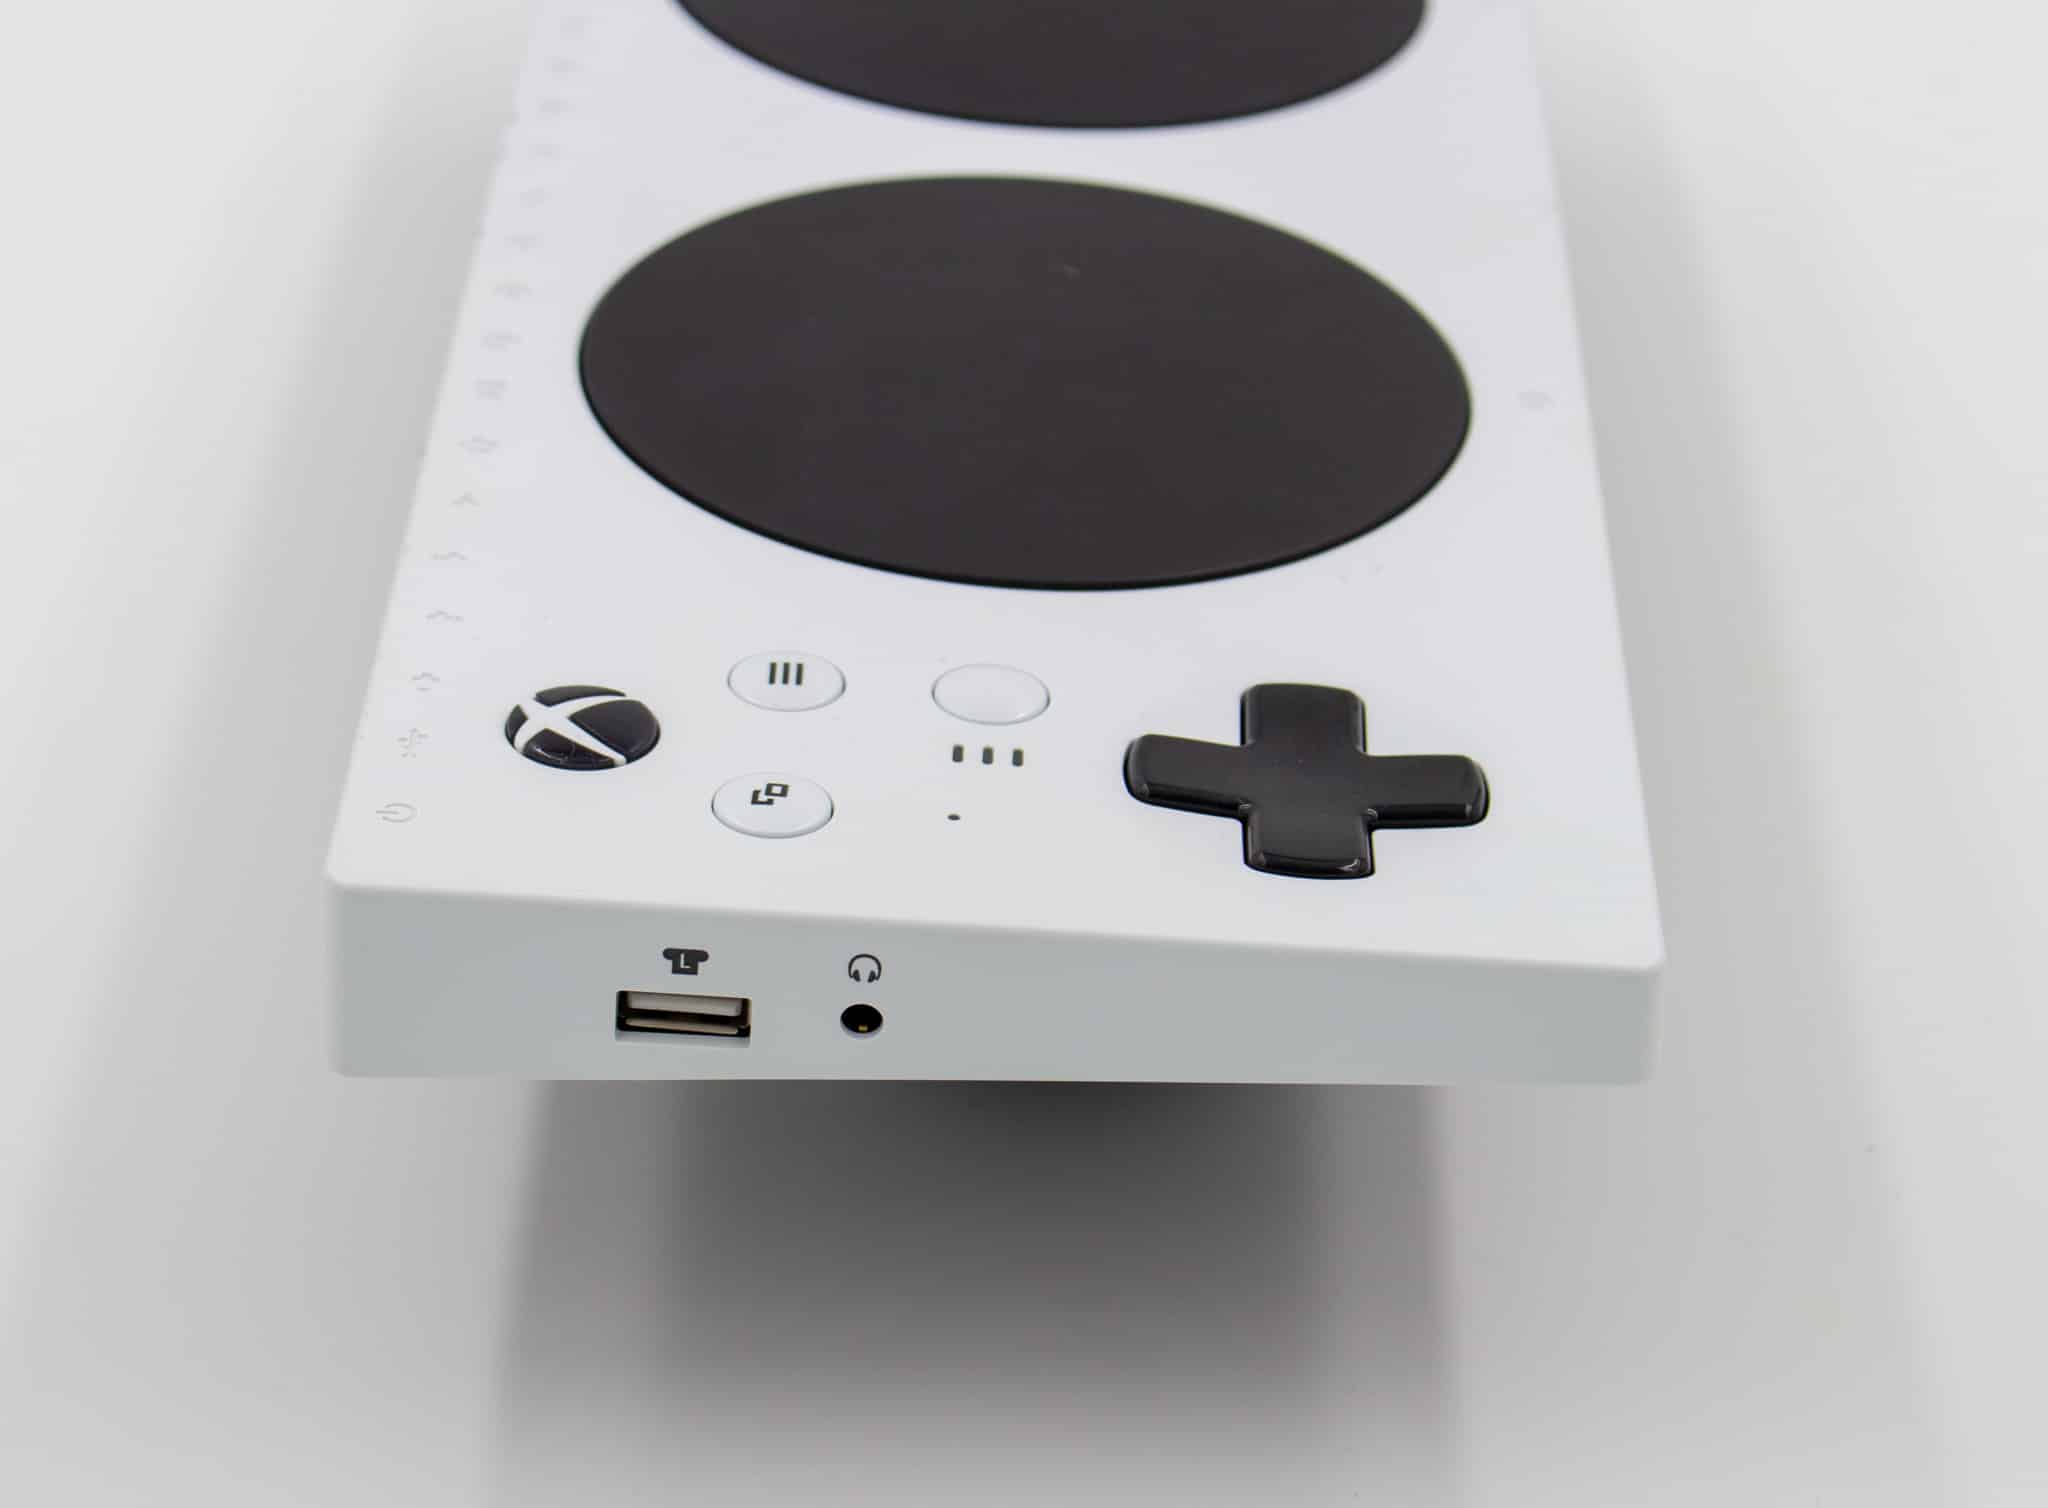 The side of an Xbox Adaptive Controller. There is a USB port and an audio port with icons above them.